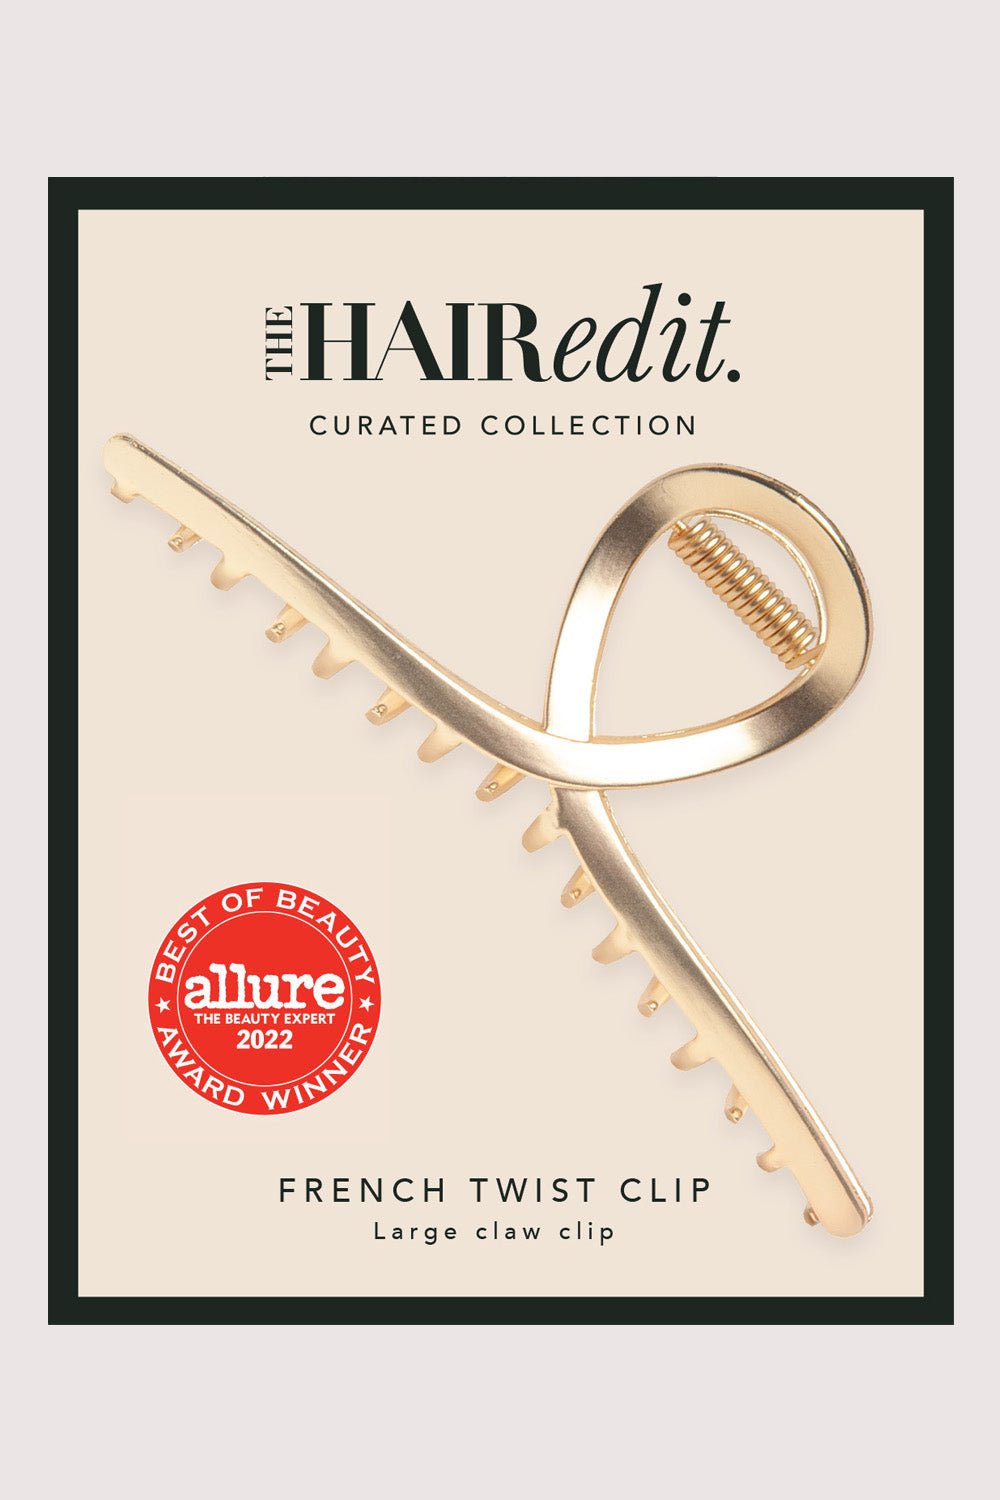 the hair edit french twist clip packaging with allure 2022 award